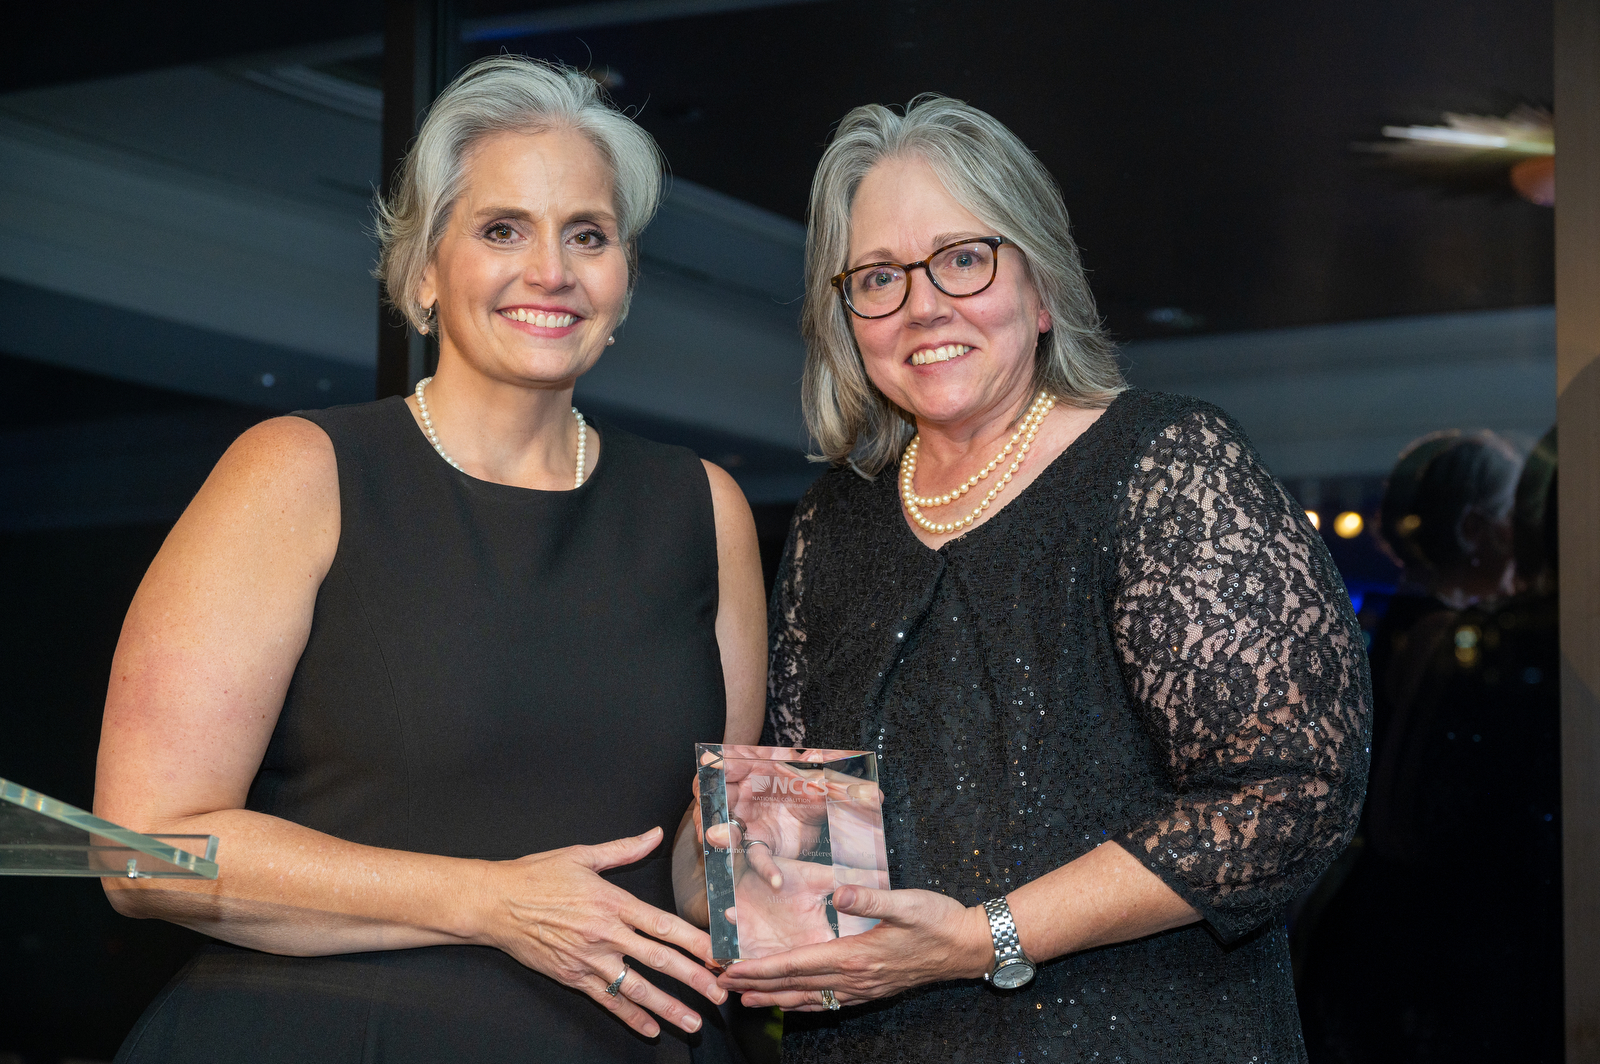 NCCS CEO Shelley Fuld Nasso (L) presents the 2022 Ellen L. Stovall Patient Advocate Award to Alicia Staley (R).